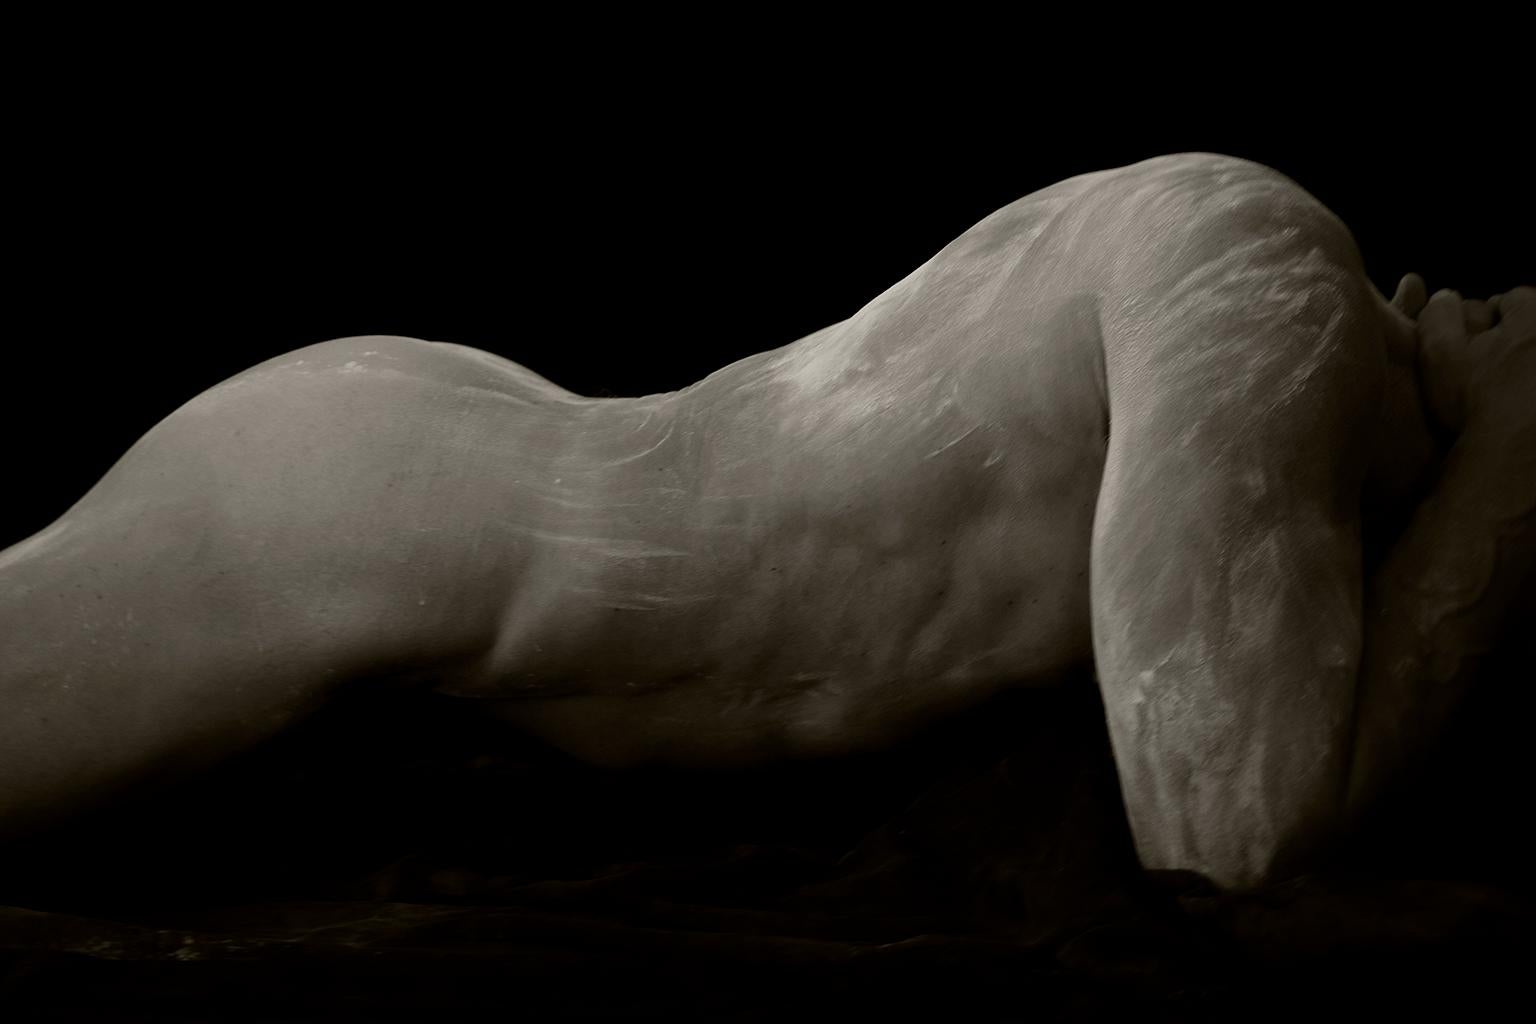 Ricky Cohete Black and White Photograph - Sculpture of Cornelio, 3. Male Nude. Black and White Limited Edition Photograph